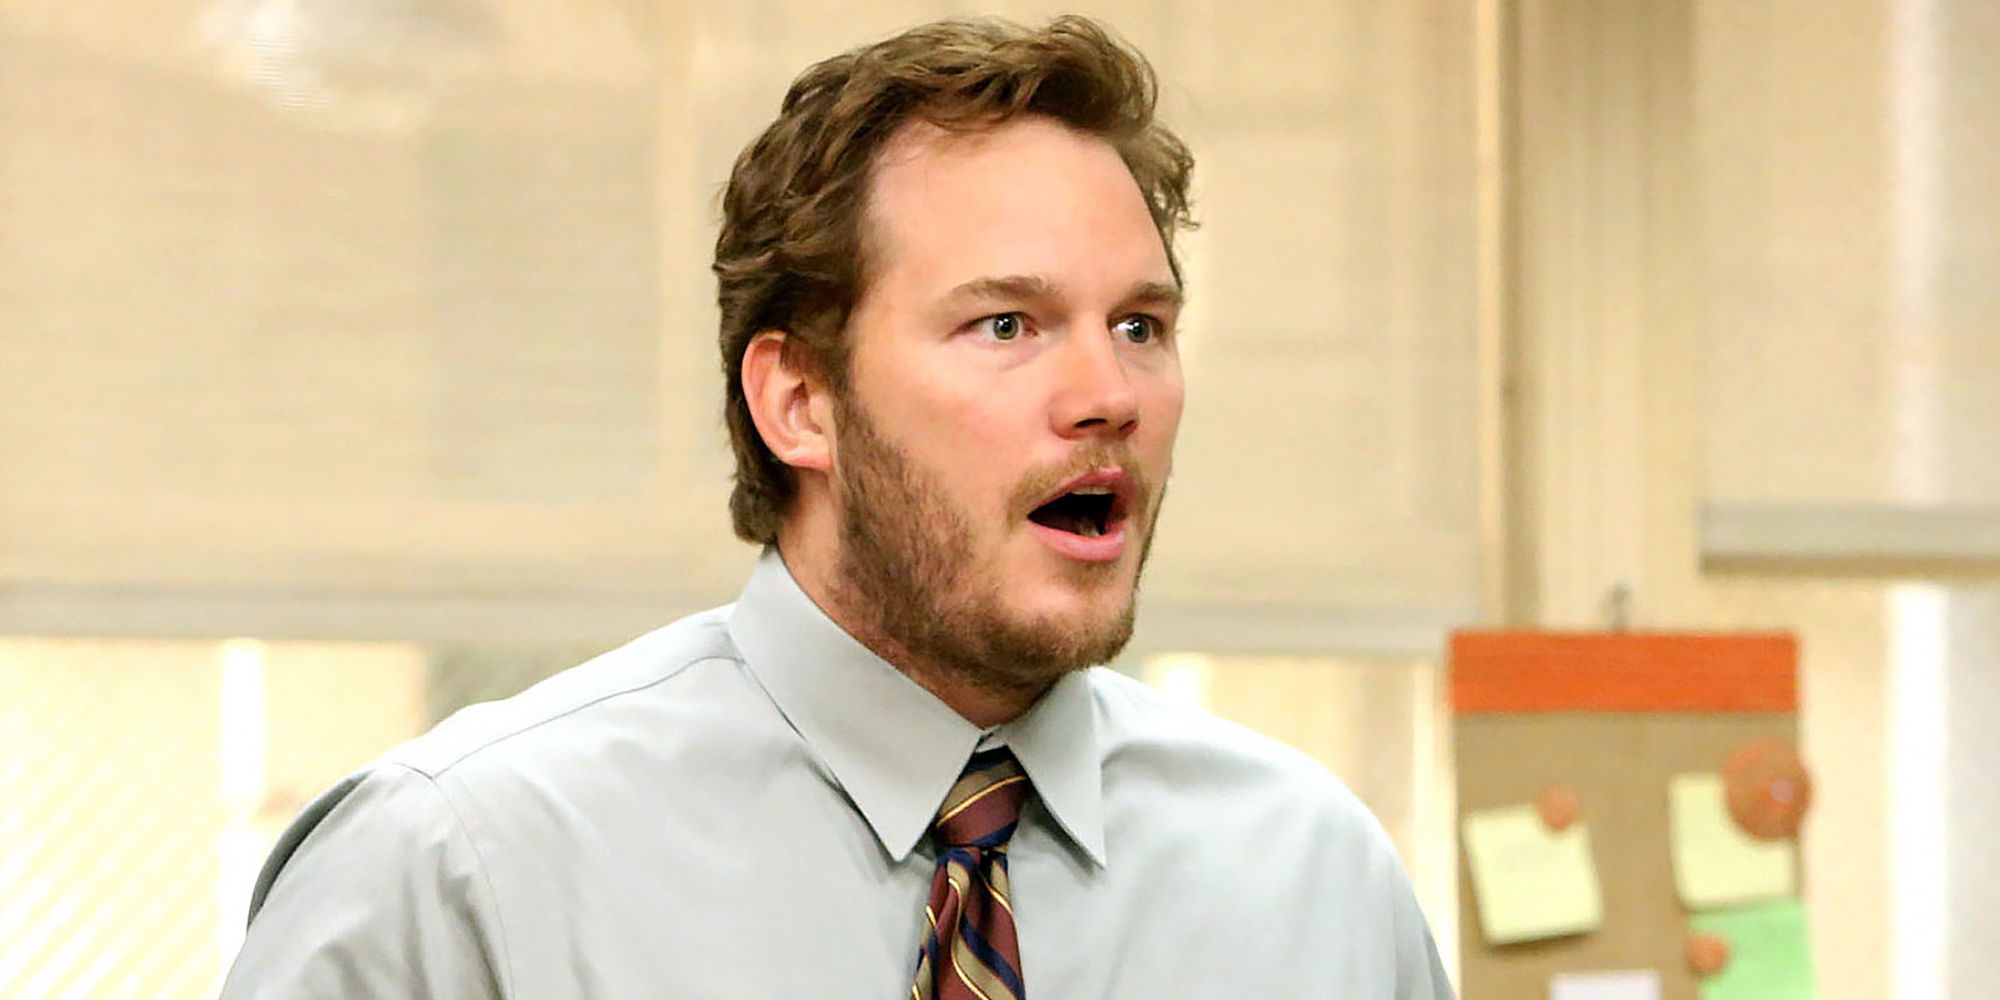 Andy Dwyer (Chris Pratt) was supposed to leave the show after his relationship breakup but had too much comic talent to waste